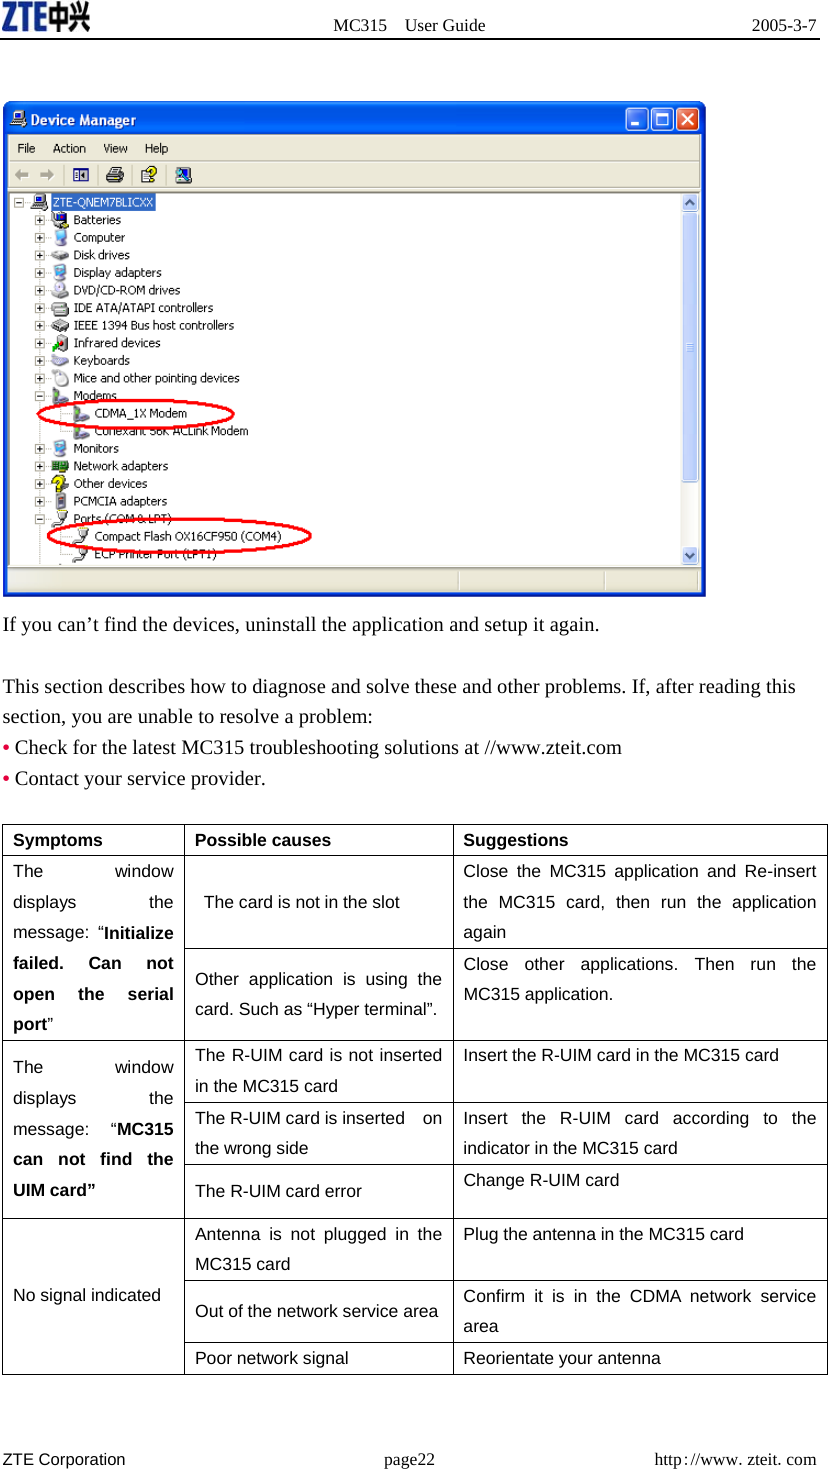  MC315 User Guide  2005-3-7  ZTE Corporation page22 http://www.zteit.com   If you can’t find the devices, uninstall the application and setup it again.  This section describes how to diagnose and solve these and other problems. If, after reading this section, you are unable to resolve a problem: • Check for the latest MC315 troubleshooting solutions at //www.zteit.com • Contact your service provider.  Symptoms Possible causes  Suggestions   The card is not in the slot Close the MC315 application and Re-insert the MC315 card, then run the application again The window displays the message: “Initialize failed. Can not open the serial port” Other application is using the card. Such as “Hyper terminal”. Close other applications. Then run the MC315 application. The R-UIM card is not inserted in the MC315 card Insert the R-UIM card in the MC315 card The R-UIM card is inserted    on the wrong side Insert the R-UIM card according to the indicator in the MC315 card The window displays the message: “MC315 can not find the UIM card” The R-UIM card error  Change R-UIM card   Antenna is not plugged in the MC315 card Plug the antenna in the MC315 card Out of the network service area  Confirm it is in the CDMA network service area  No signal indicated Poor network signal  Reorientate your antenna 